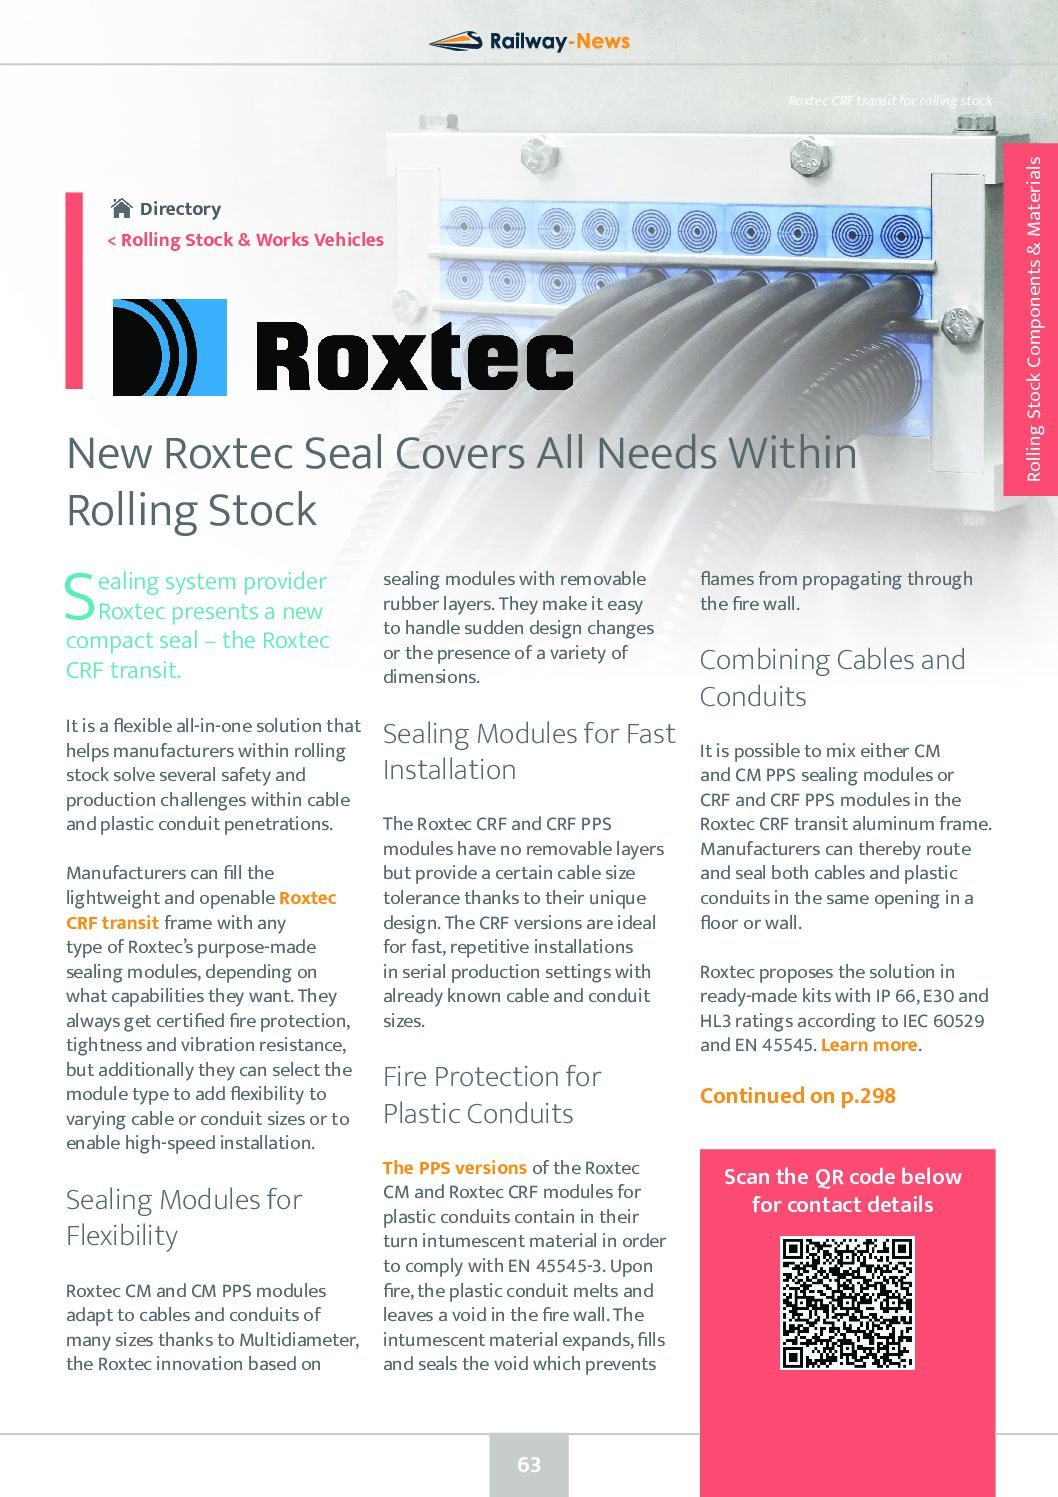 New Roxtec Seal Covers All Needs Within Rolling Stock